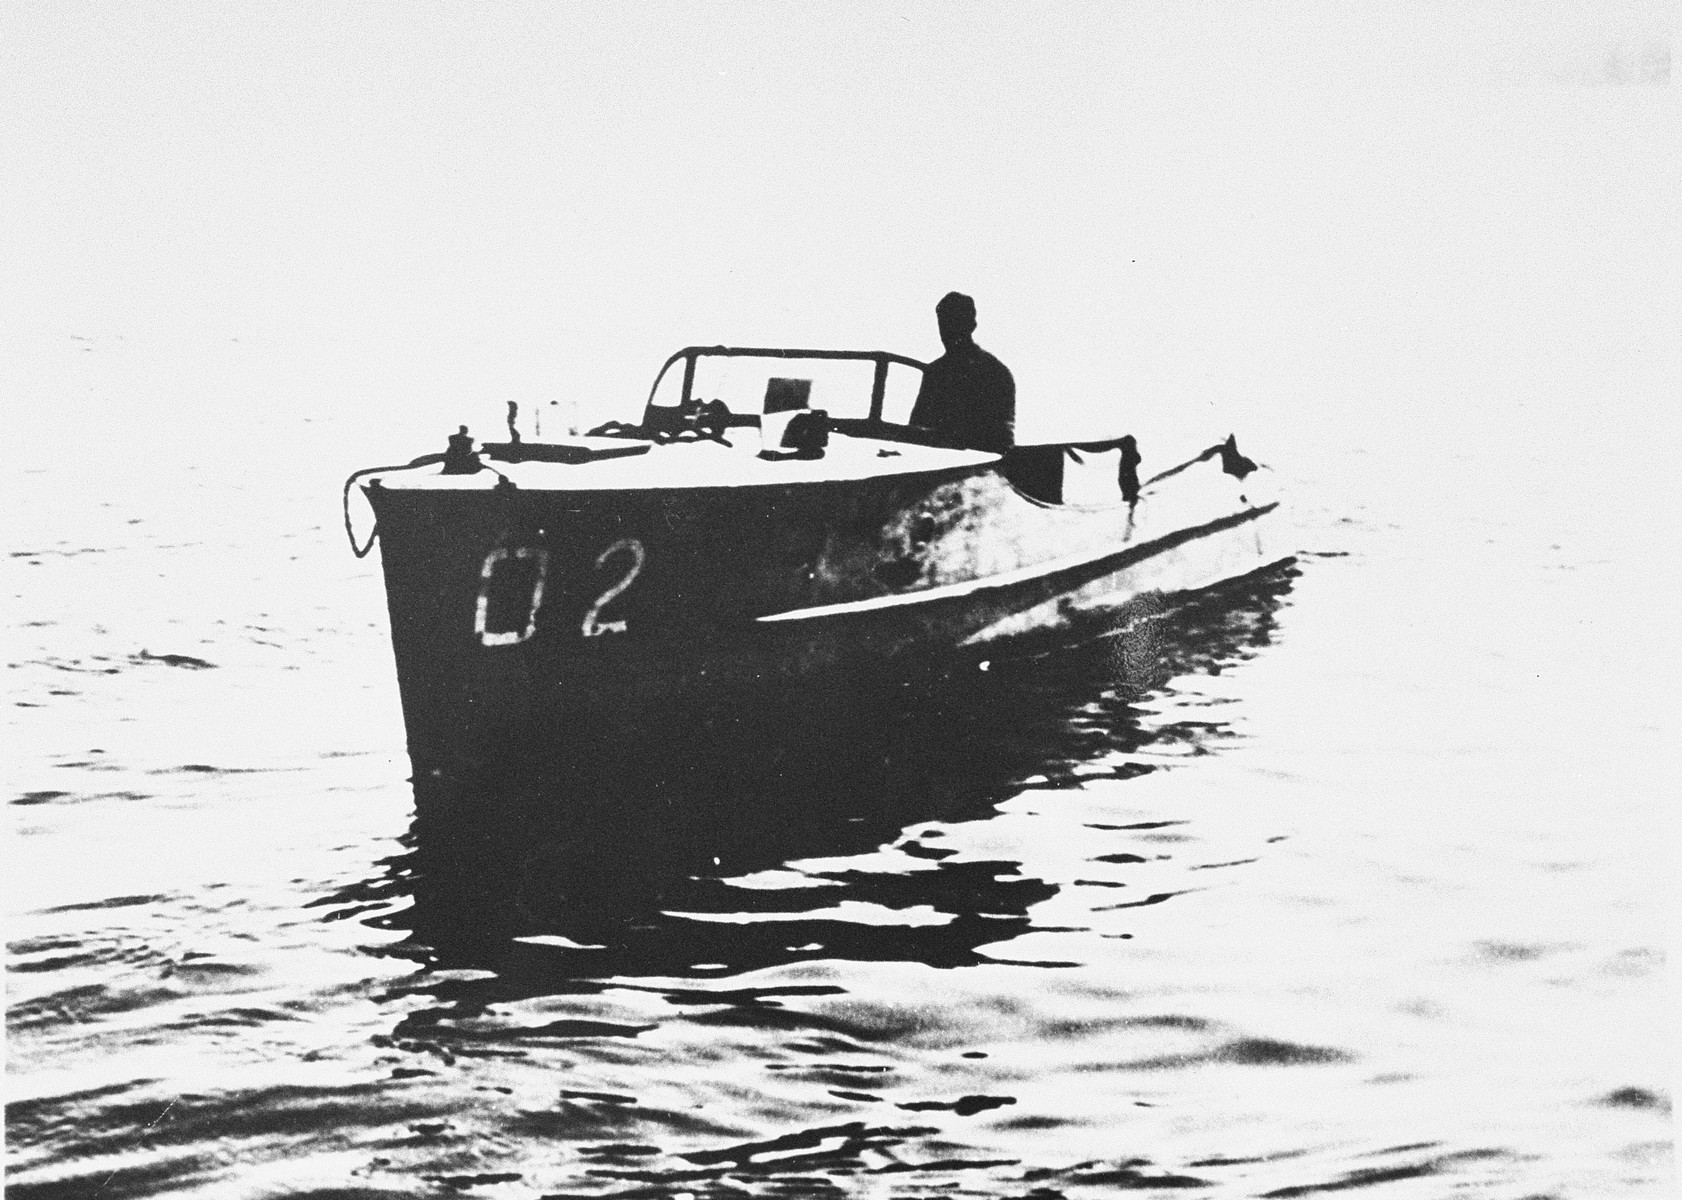 View of a Danish fishing boat that was used in the rescue of Jews during the occupation of Denmark.

Driven by Thormod Larsen, this boat is the one now on display in the permanent exhibition of the United States Holocaust Memorial Museum.